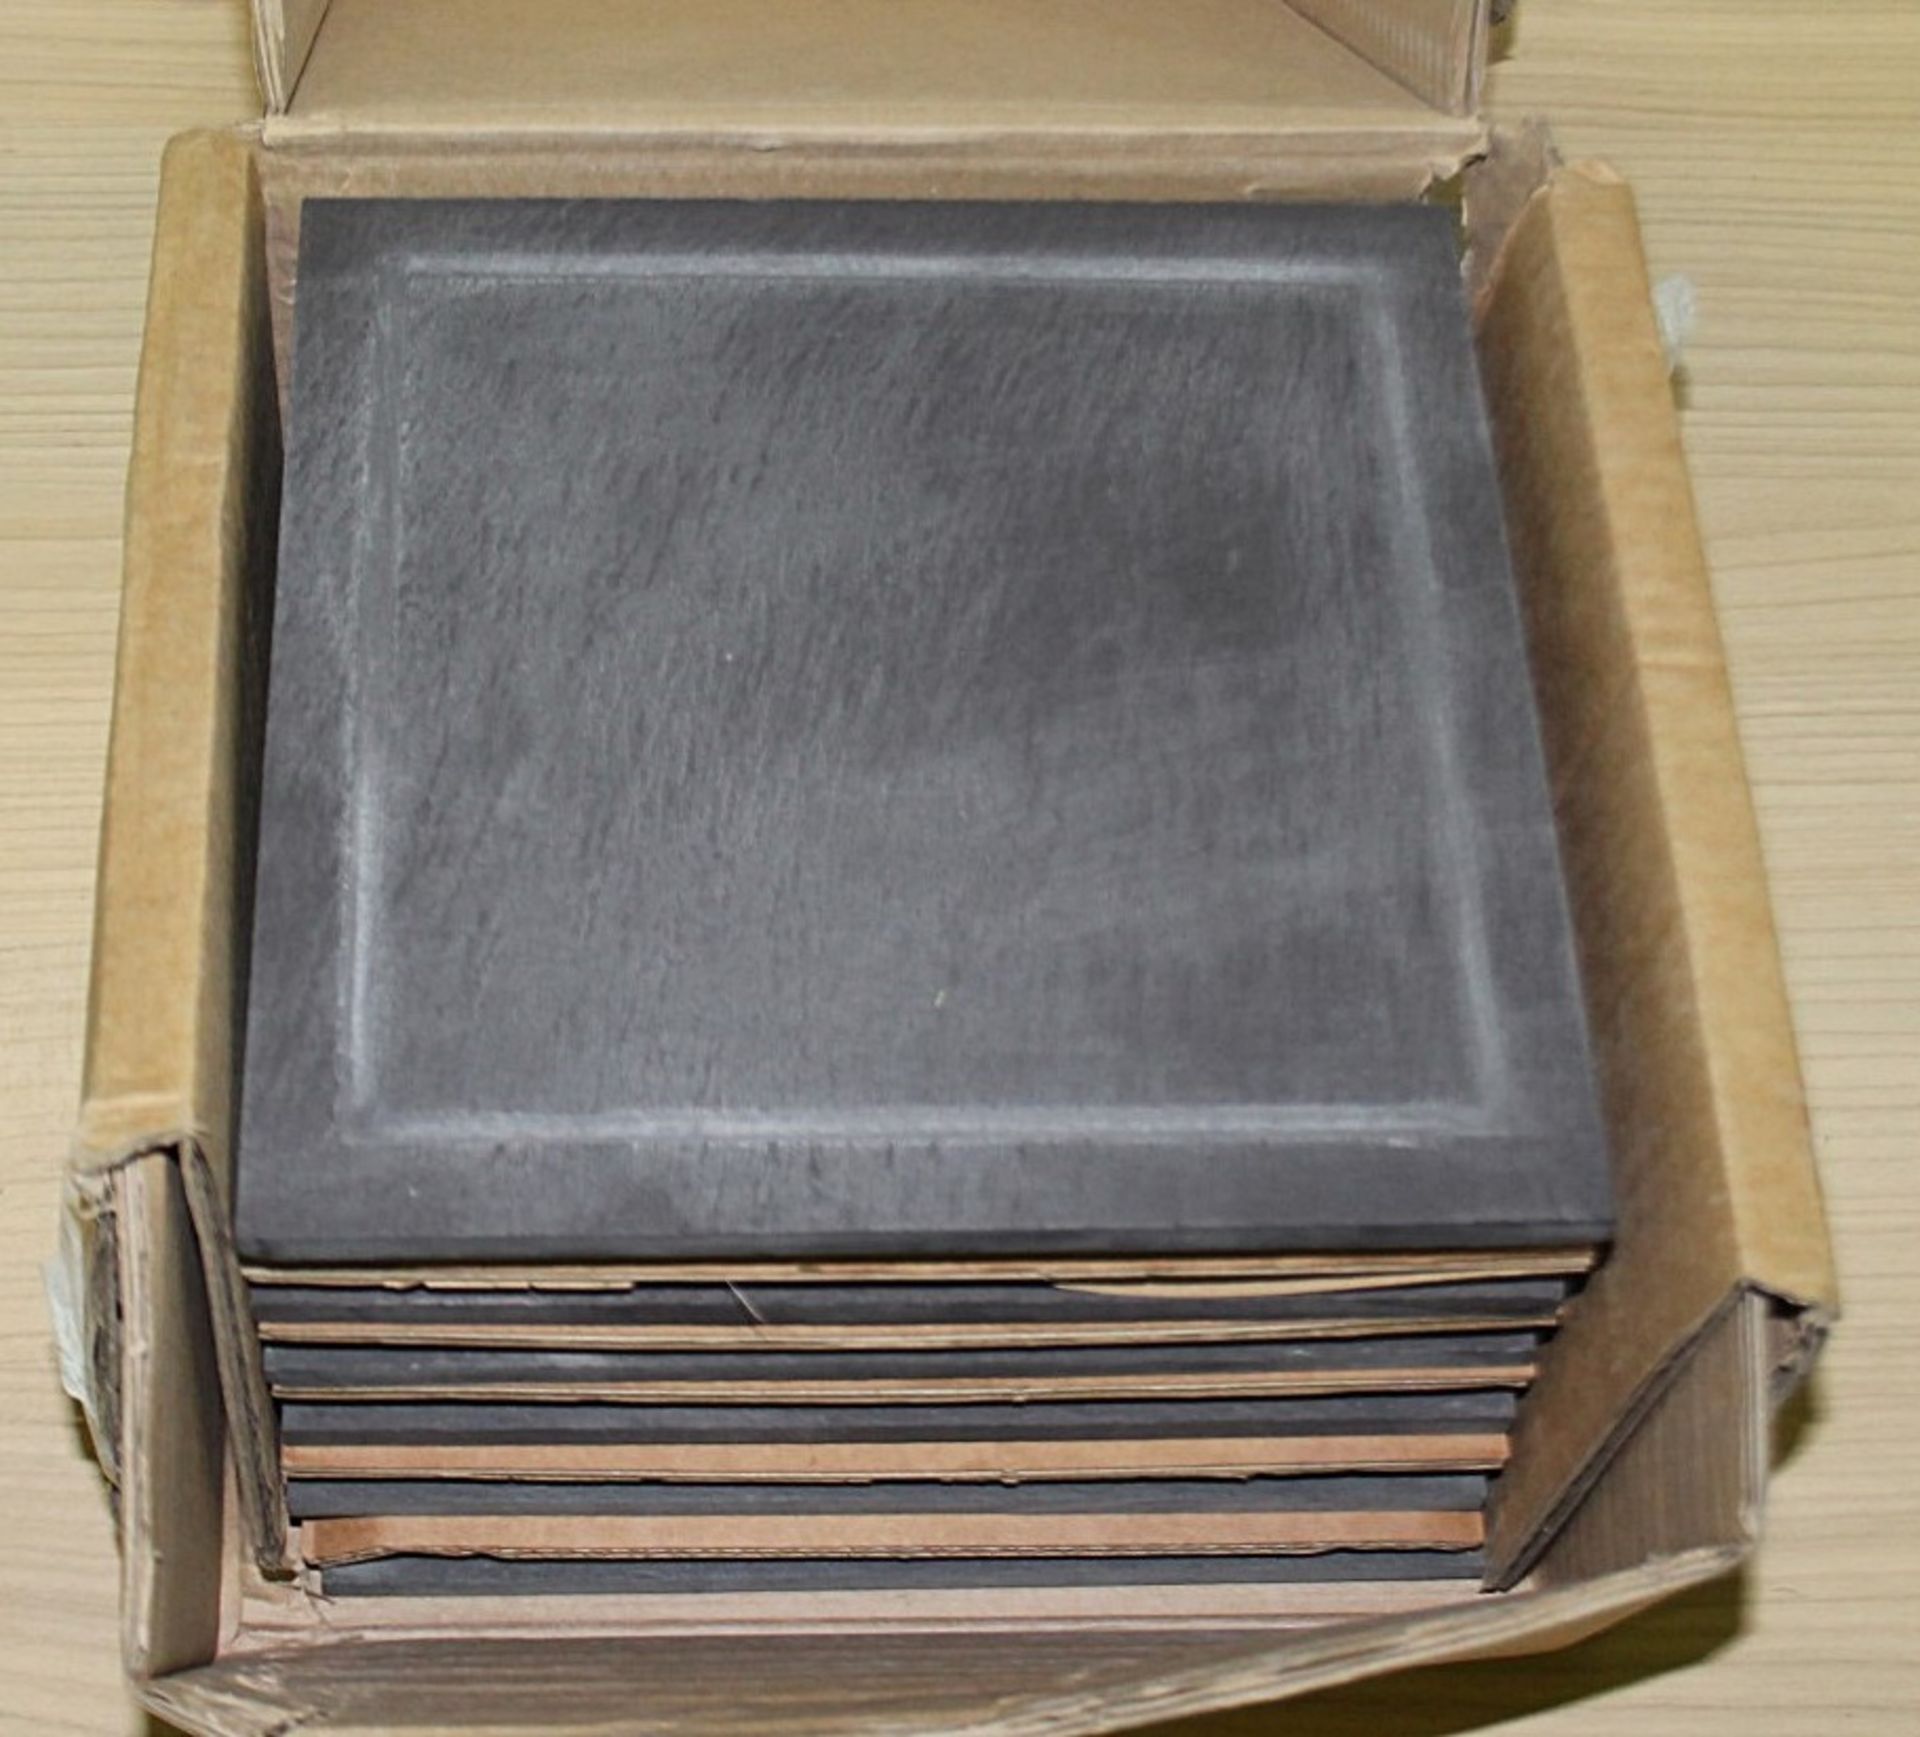 30 x Commercial Square Dining Natural British Dining Slates With Feet - Dimesions: H2 x W21 x D21cm - Image 2 of 4